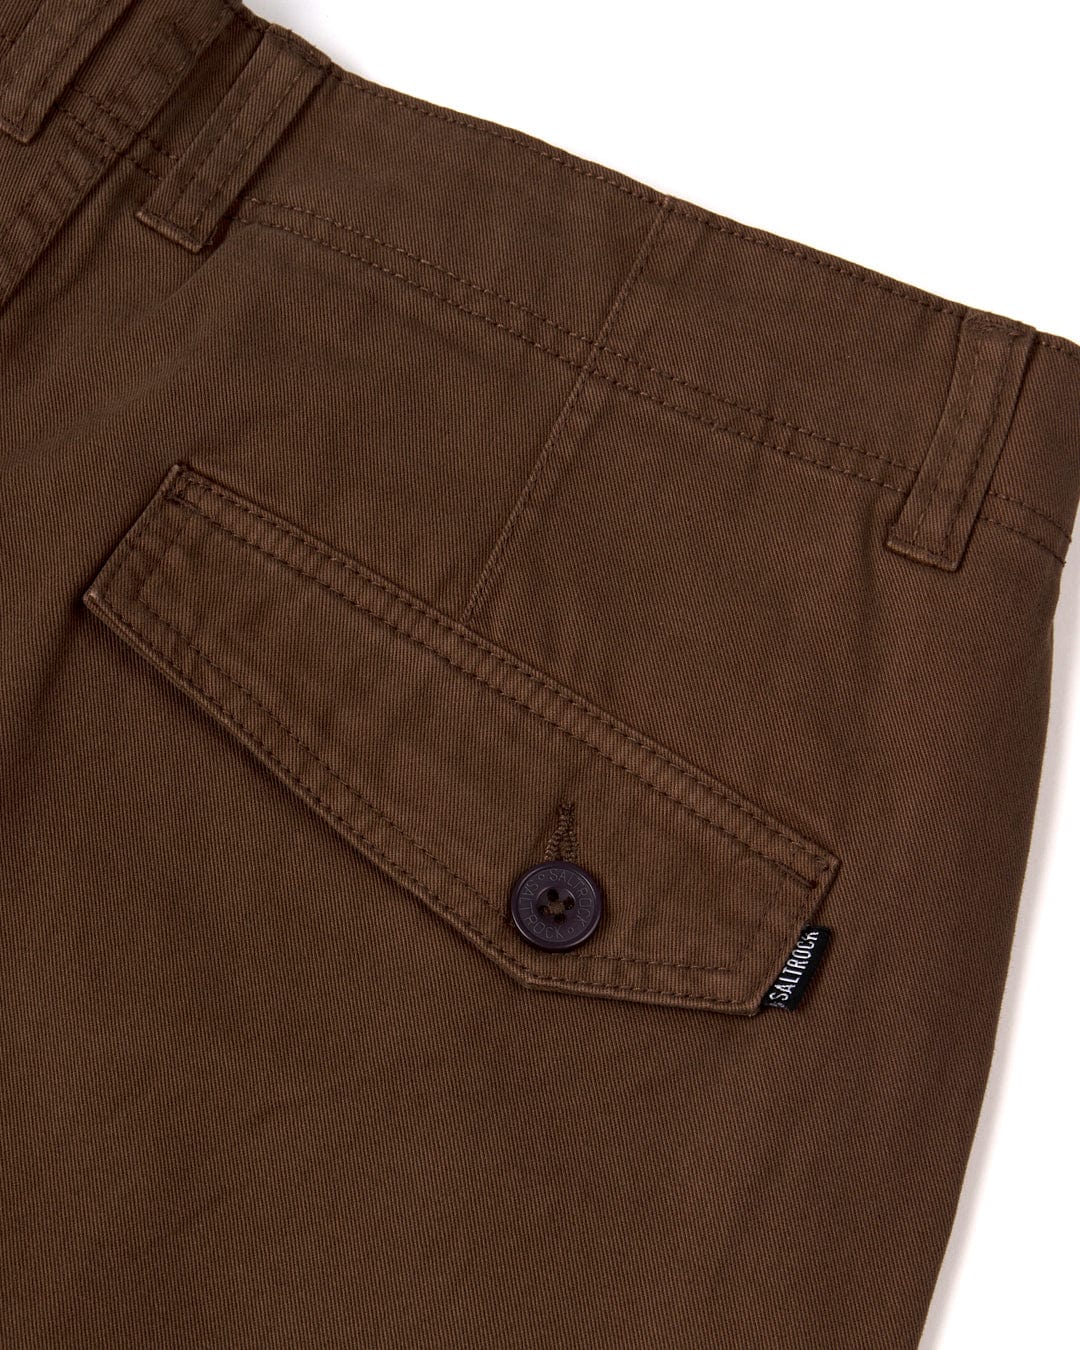 Close-up of a Godrevy 2 - Mens Cargo Trousers - Brown pocket with a button and Saltrock branding.